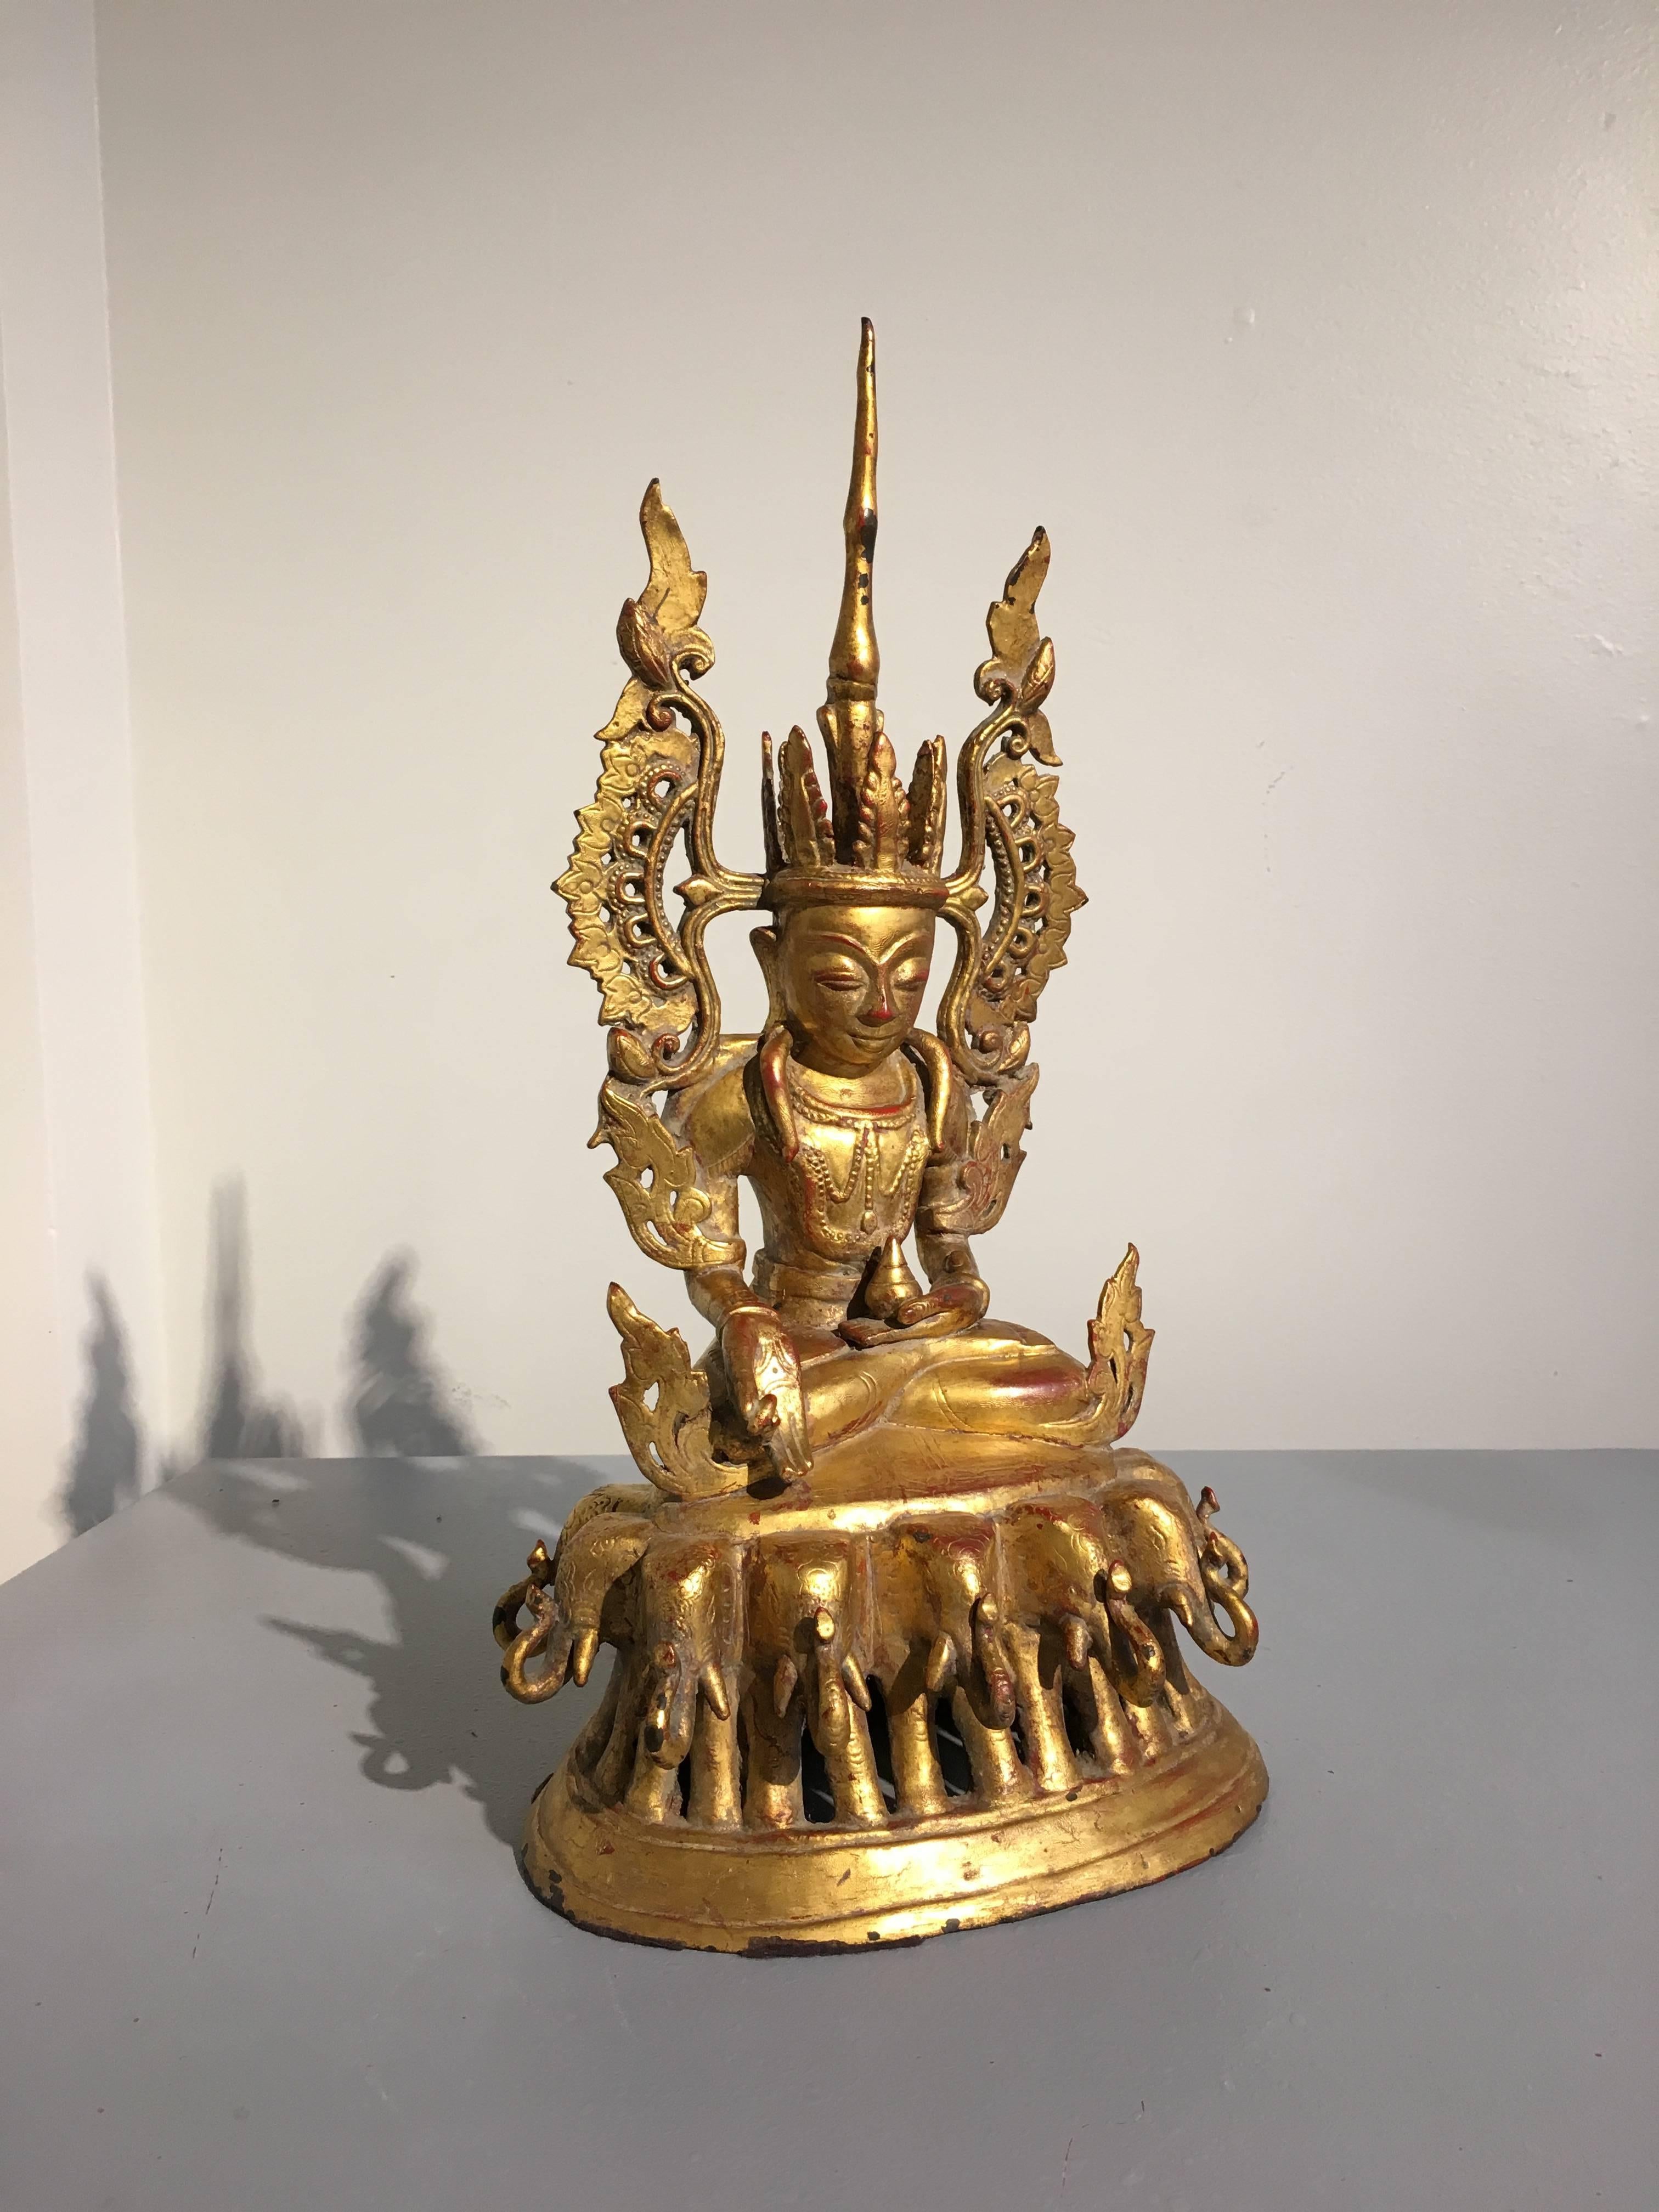 An unusual 18th century Burmese Arakan style red lacquered and richly gilt cast bronze figure of the Crowned Medicine Buddha, commonly referred to as Bhaishajyaguru.
The Supreme Healer is portrayed seated in vajrasana (full lotus position) upon a